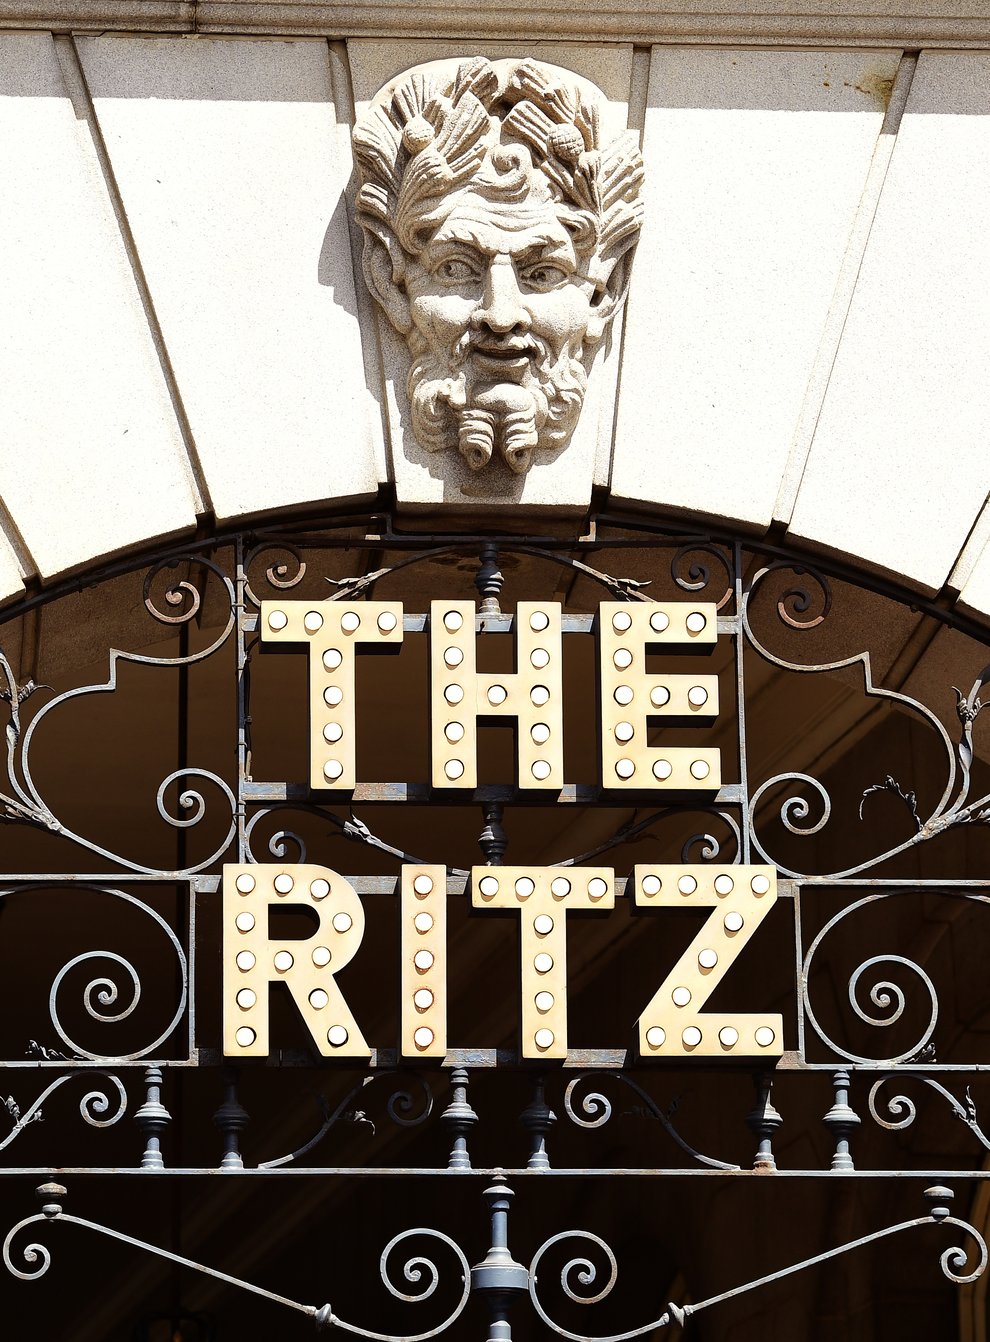 Bids for The Ritz